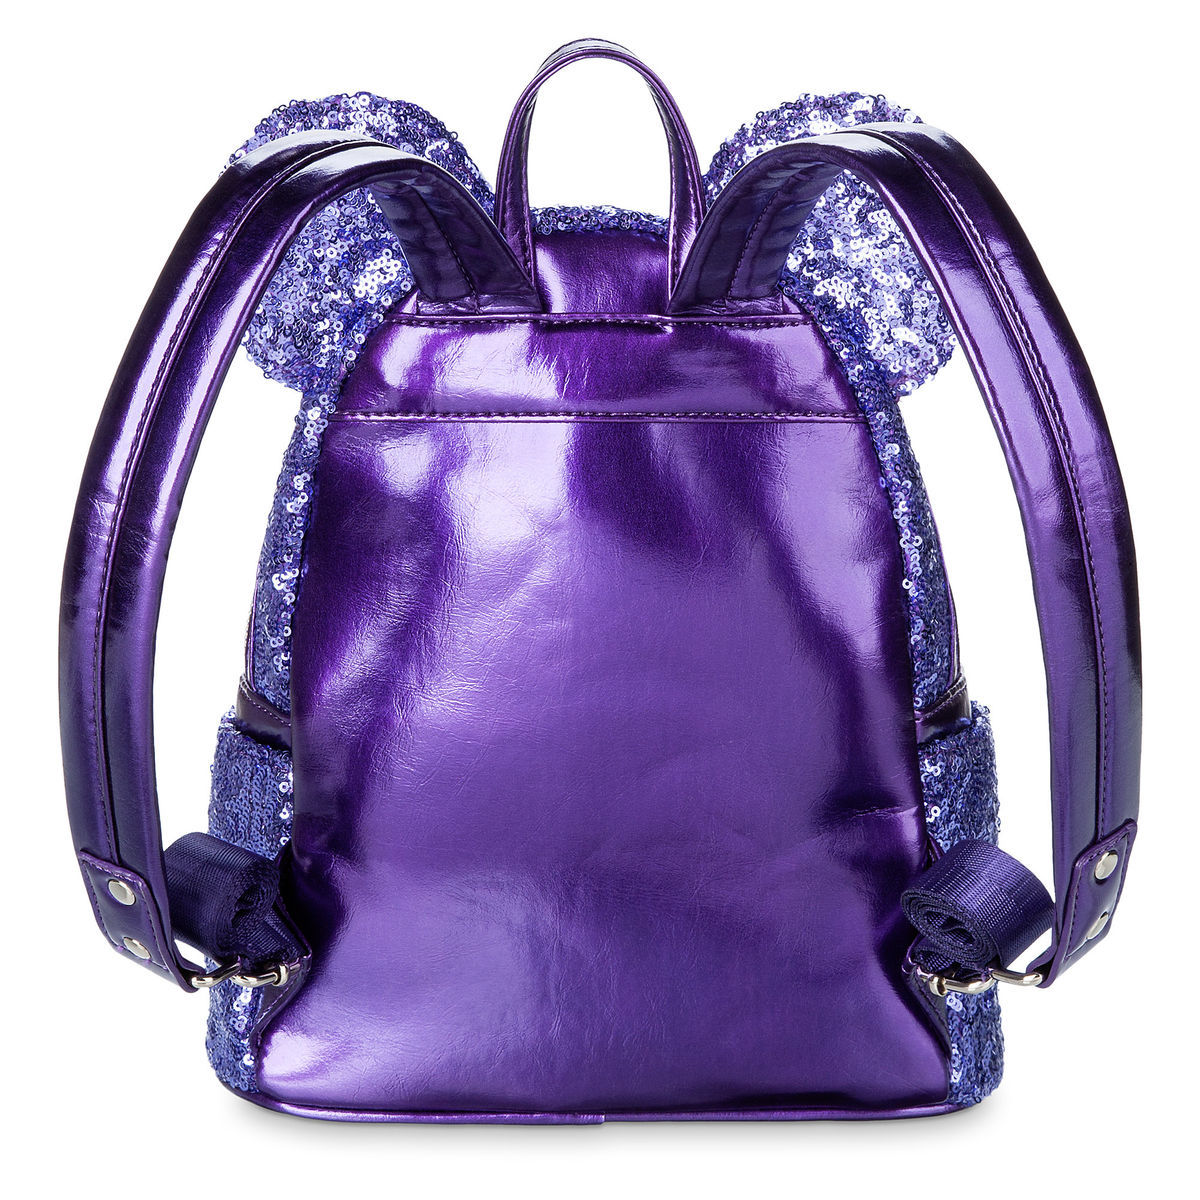 Disney Minnie Potion Purple Sequined Backpack by Loungefly New with Tags